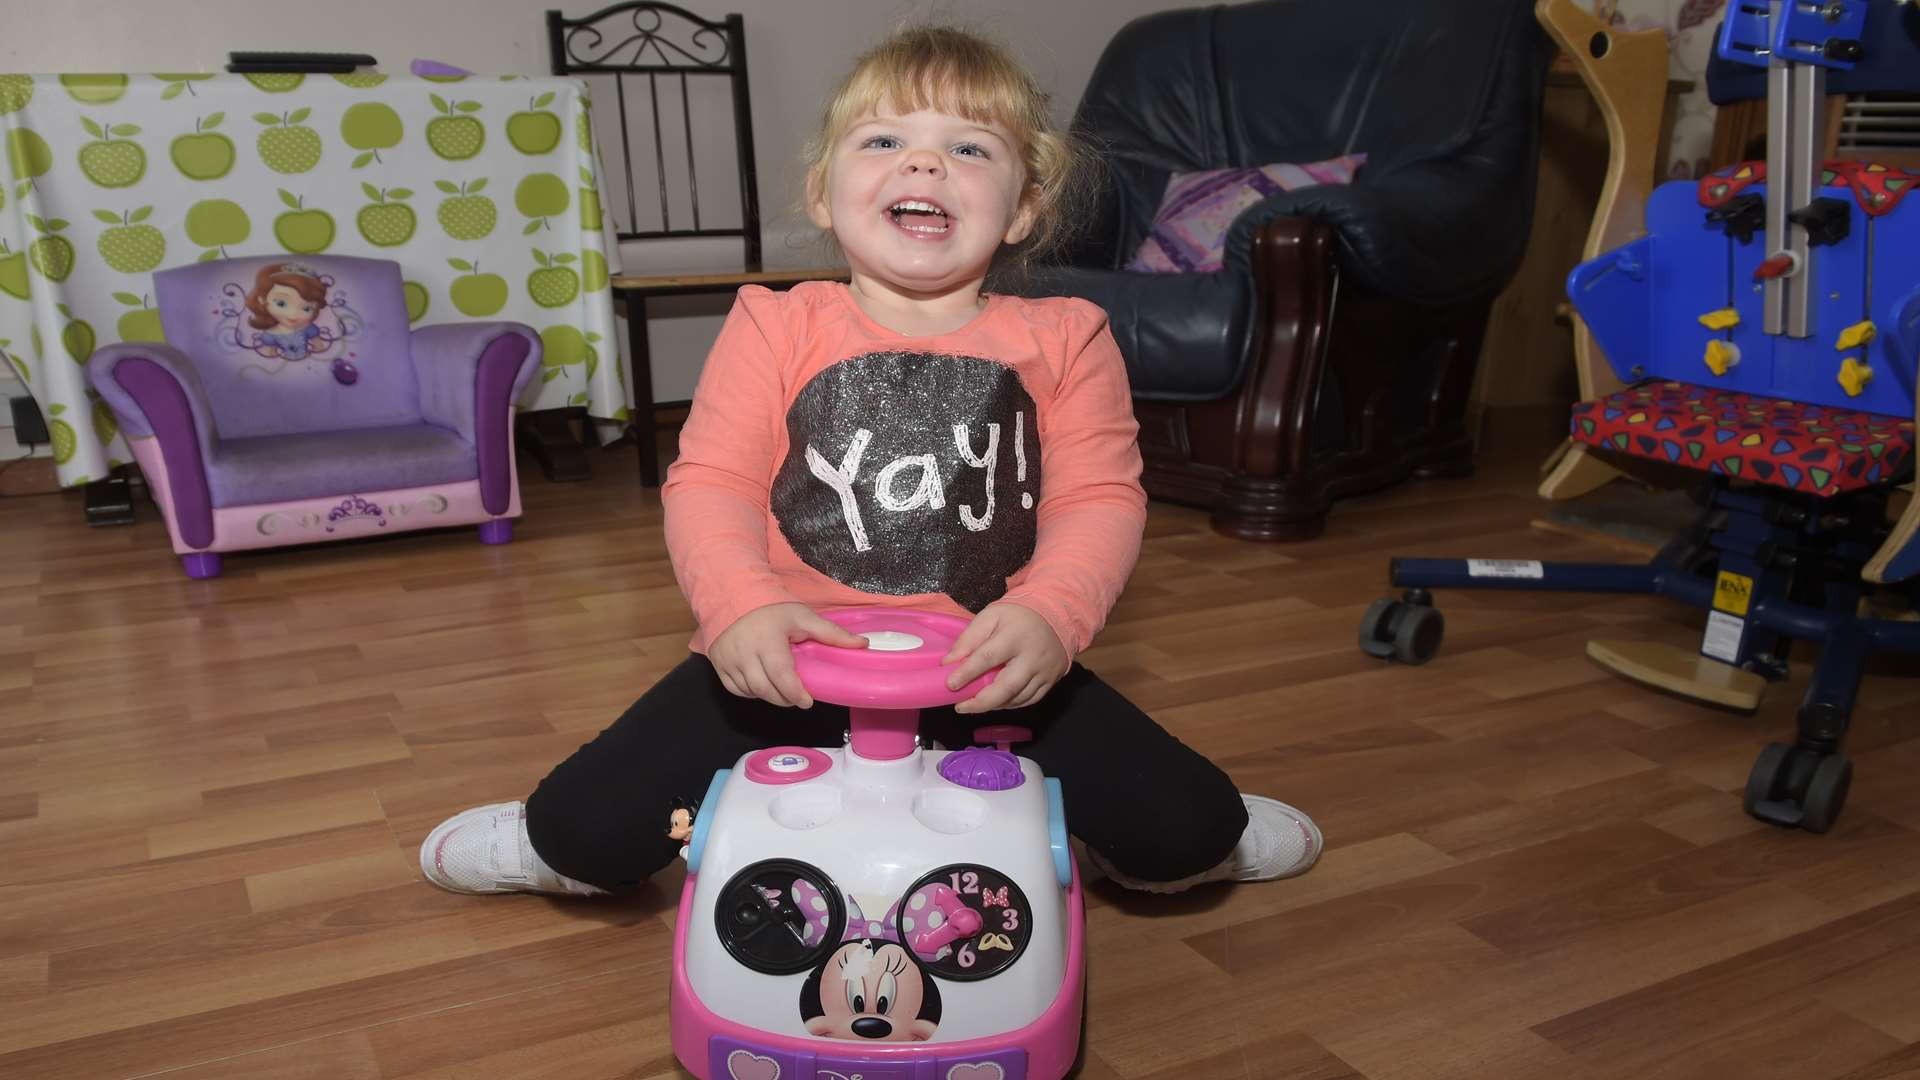 Two-year-old Elana needs a wheelchair